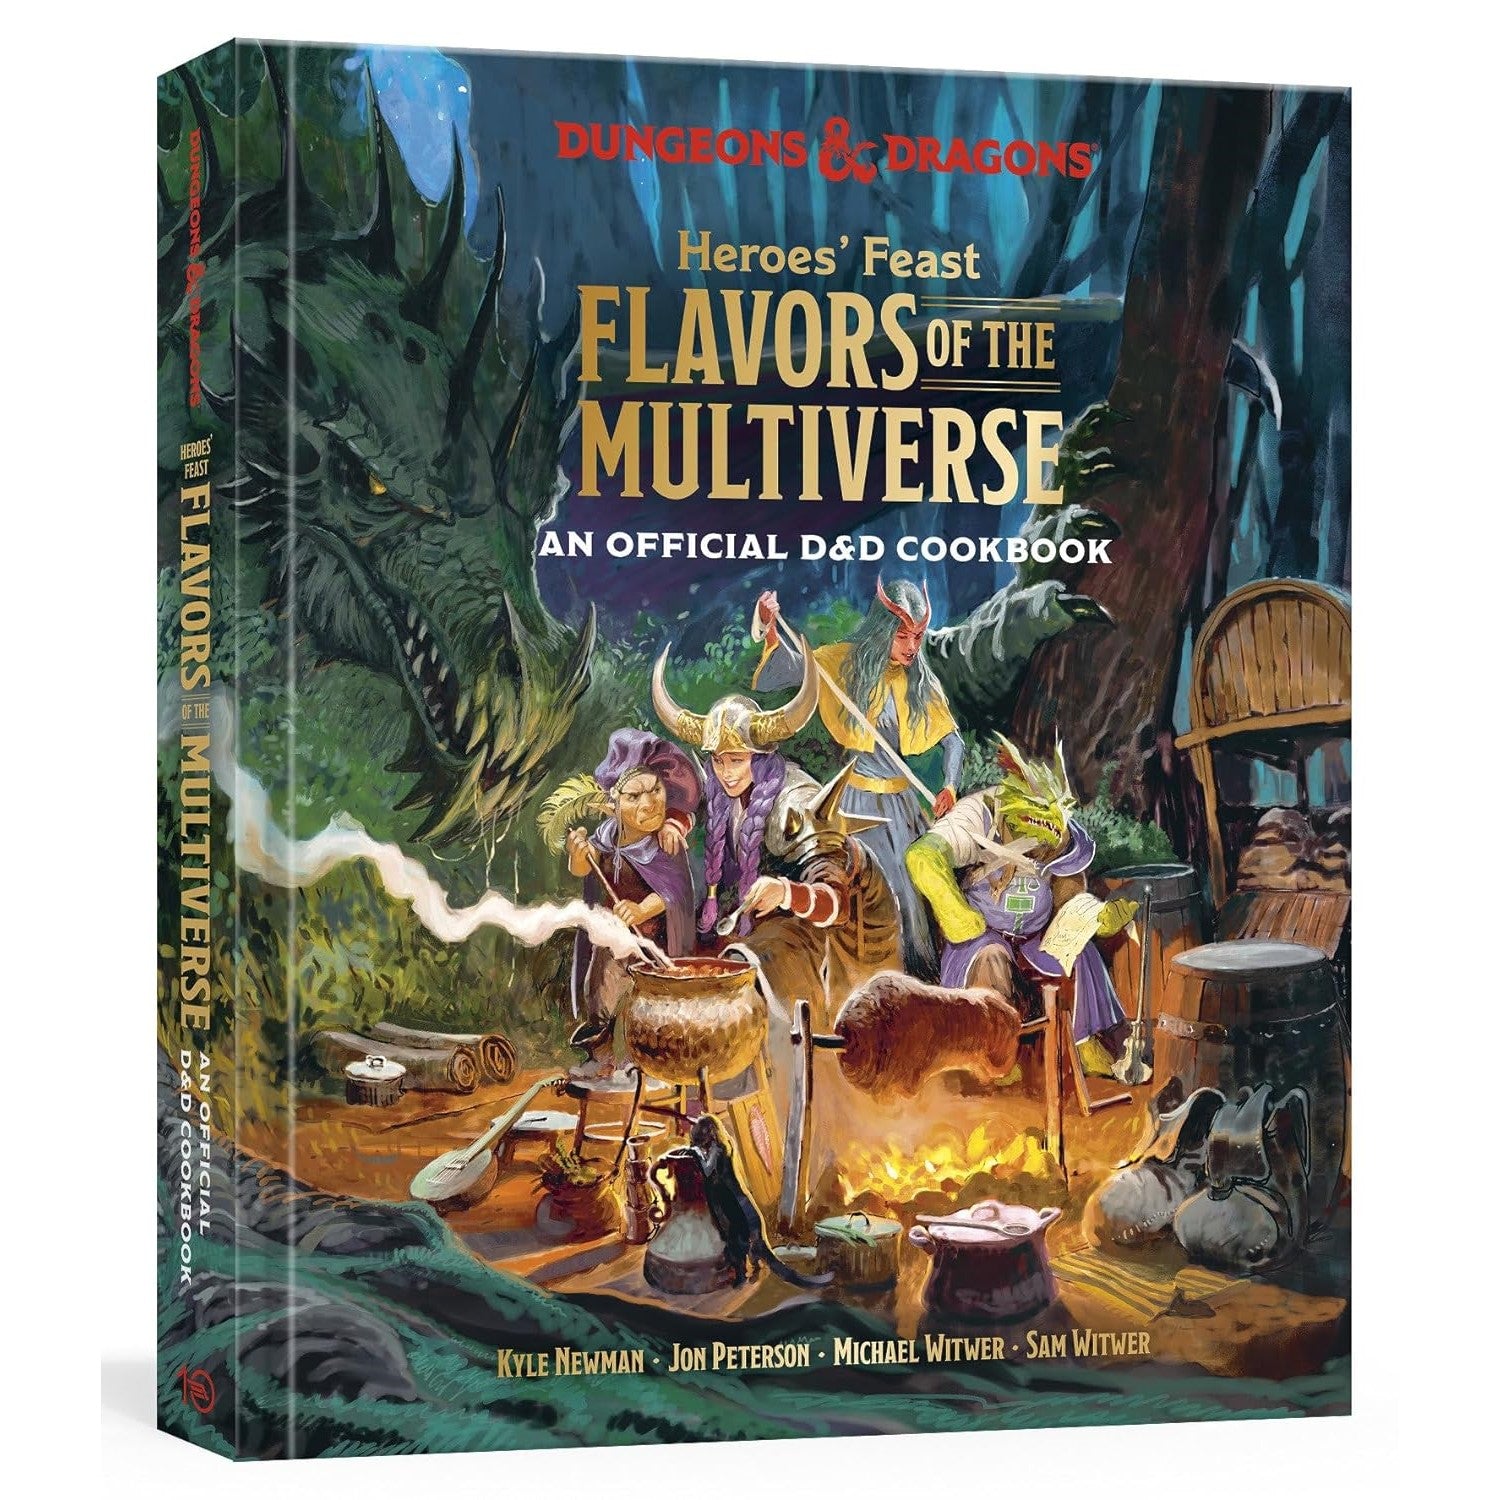 Heroes' Feast -Flavors of the Multiverse